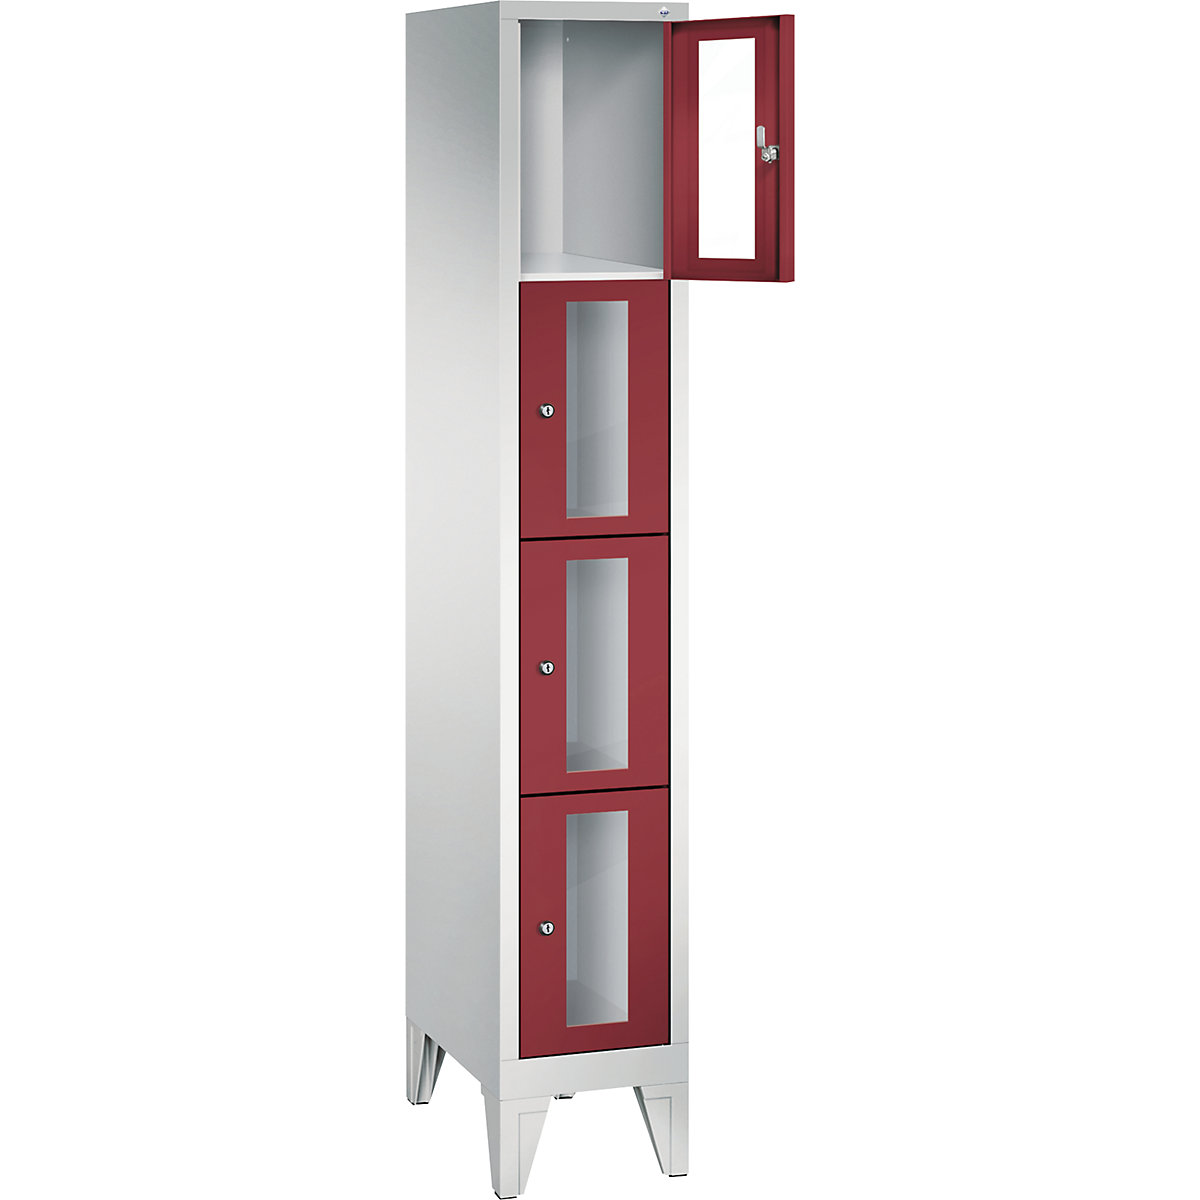 C+P – CLASSIC locker unit, compartment height 375 mm, with feet, 4 compartments, width 320 mm, ruby red door